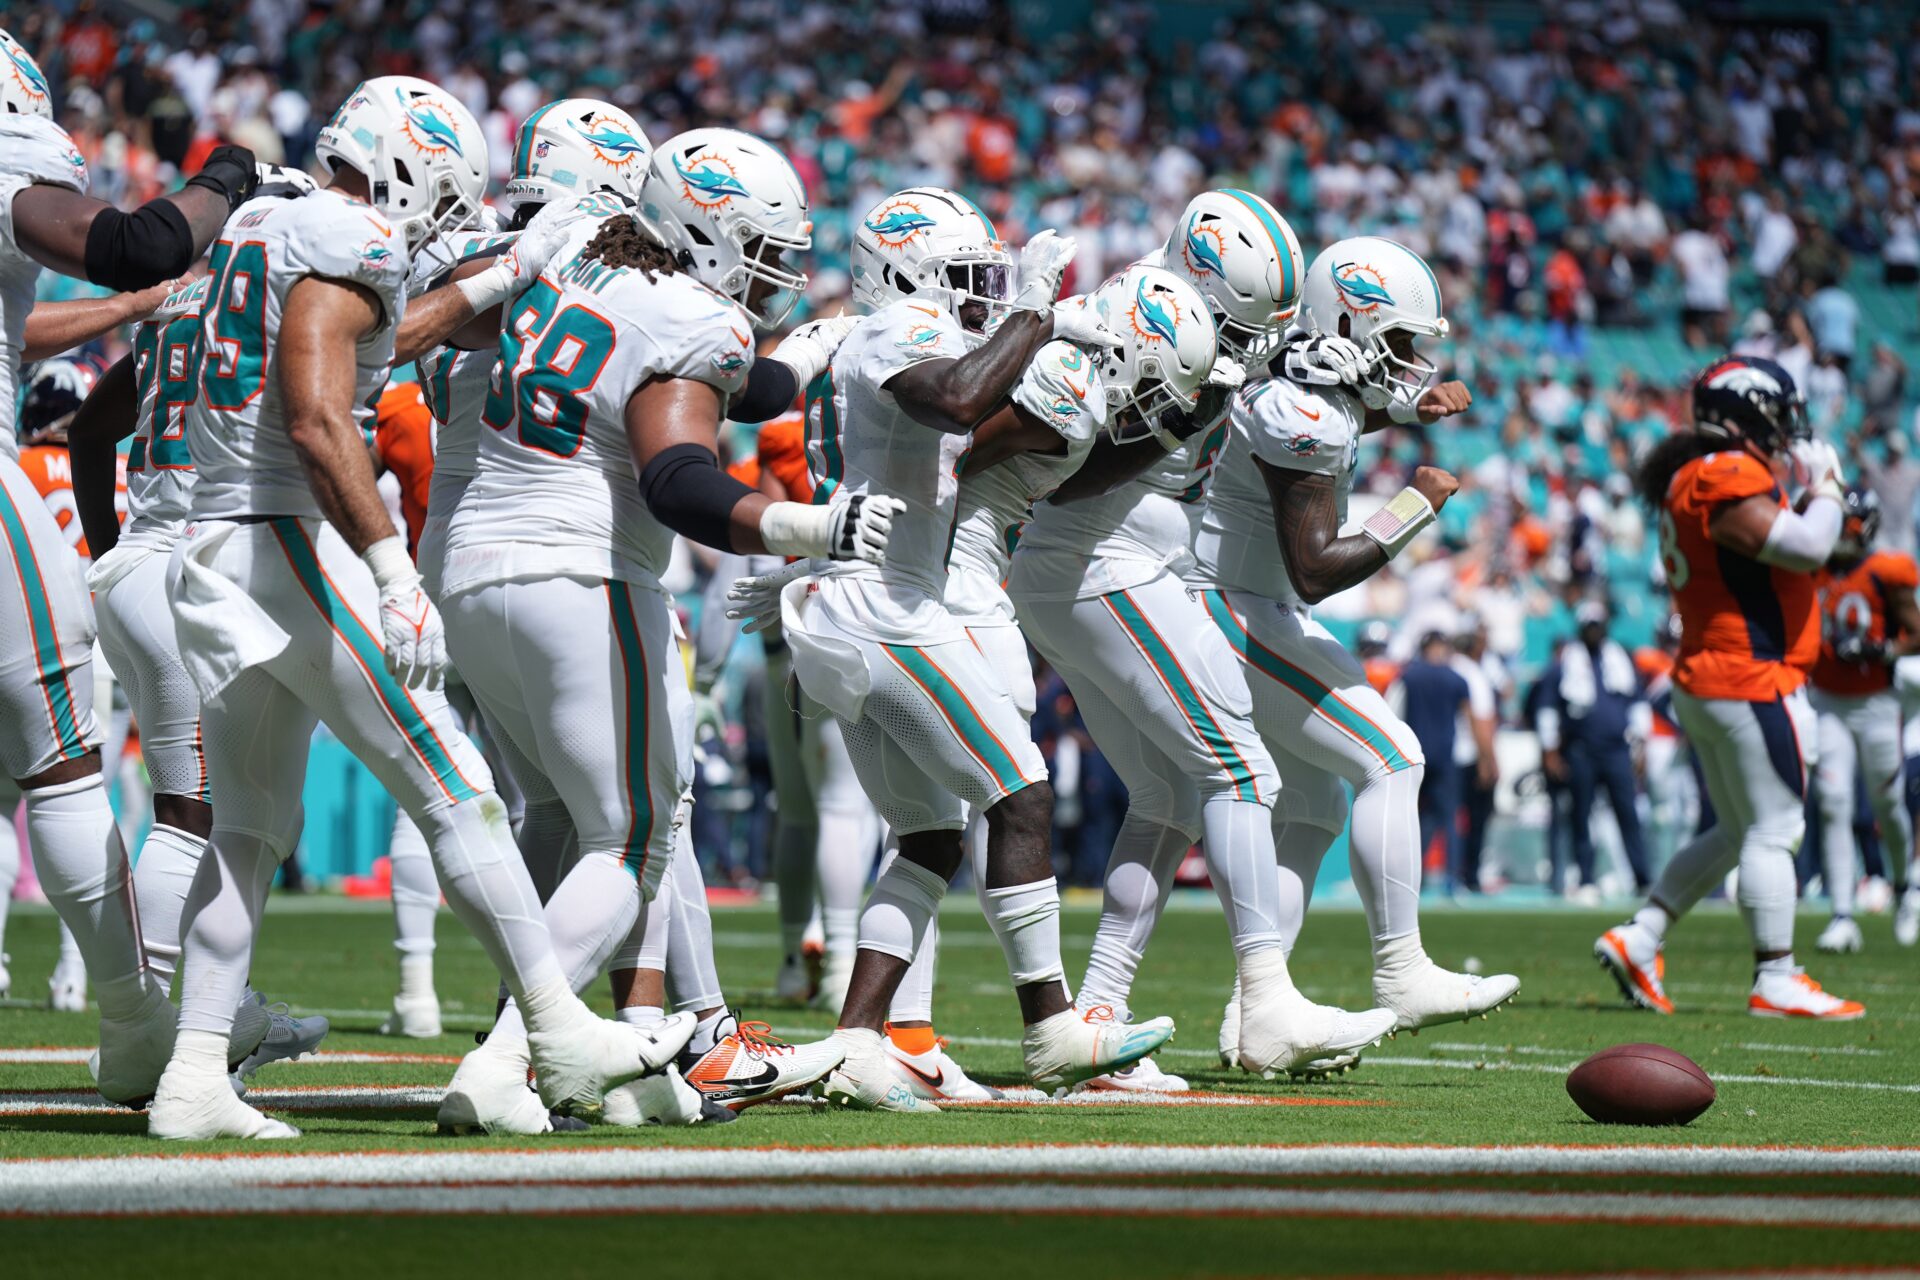 The Miami Dolphins offense does a dance routine after scoring against the Denver Broncos in the second quarter of an NFL game at Hard Rock Stadium.